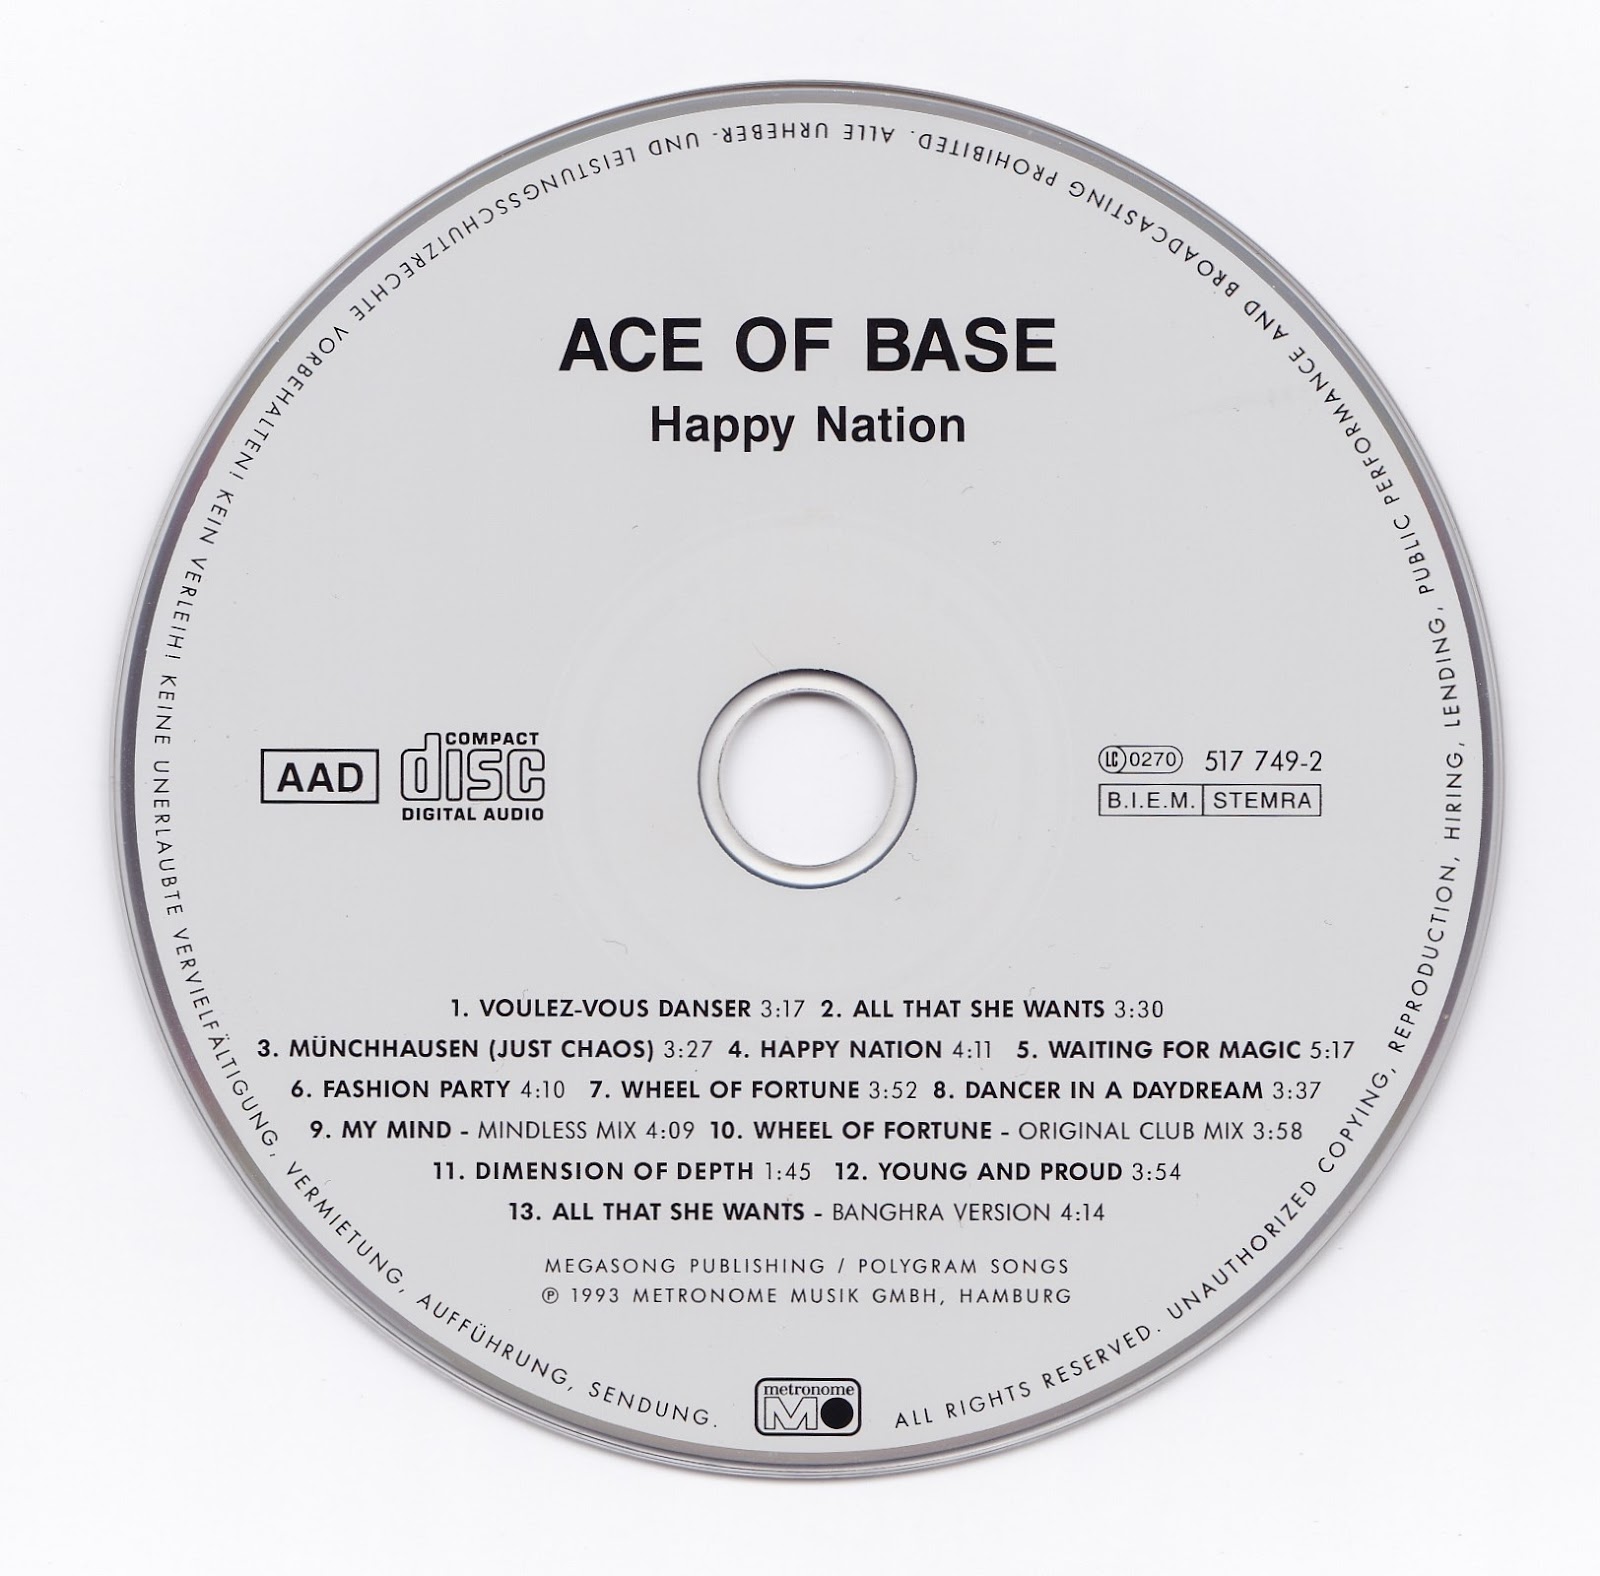 Happy nation смысл. Ace of Base 1992. Ace of Base Happy Nation. Ace of Base 1993 Happy Nation. Young and proud Ace of Base.